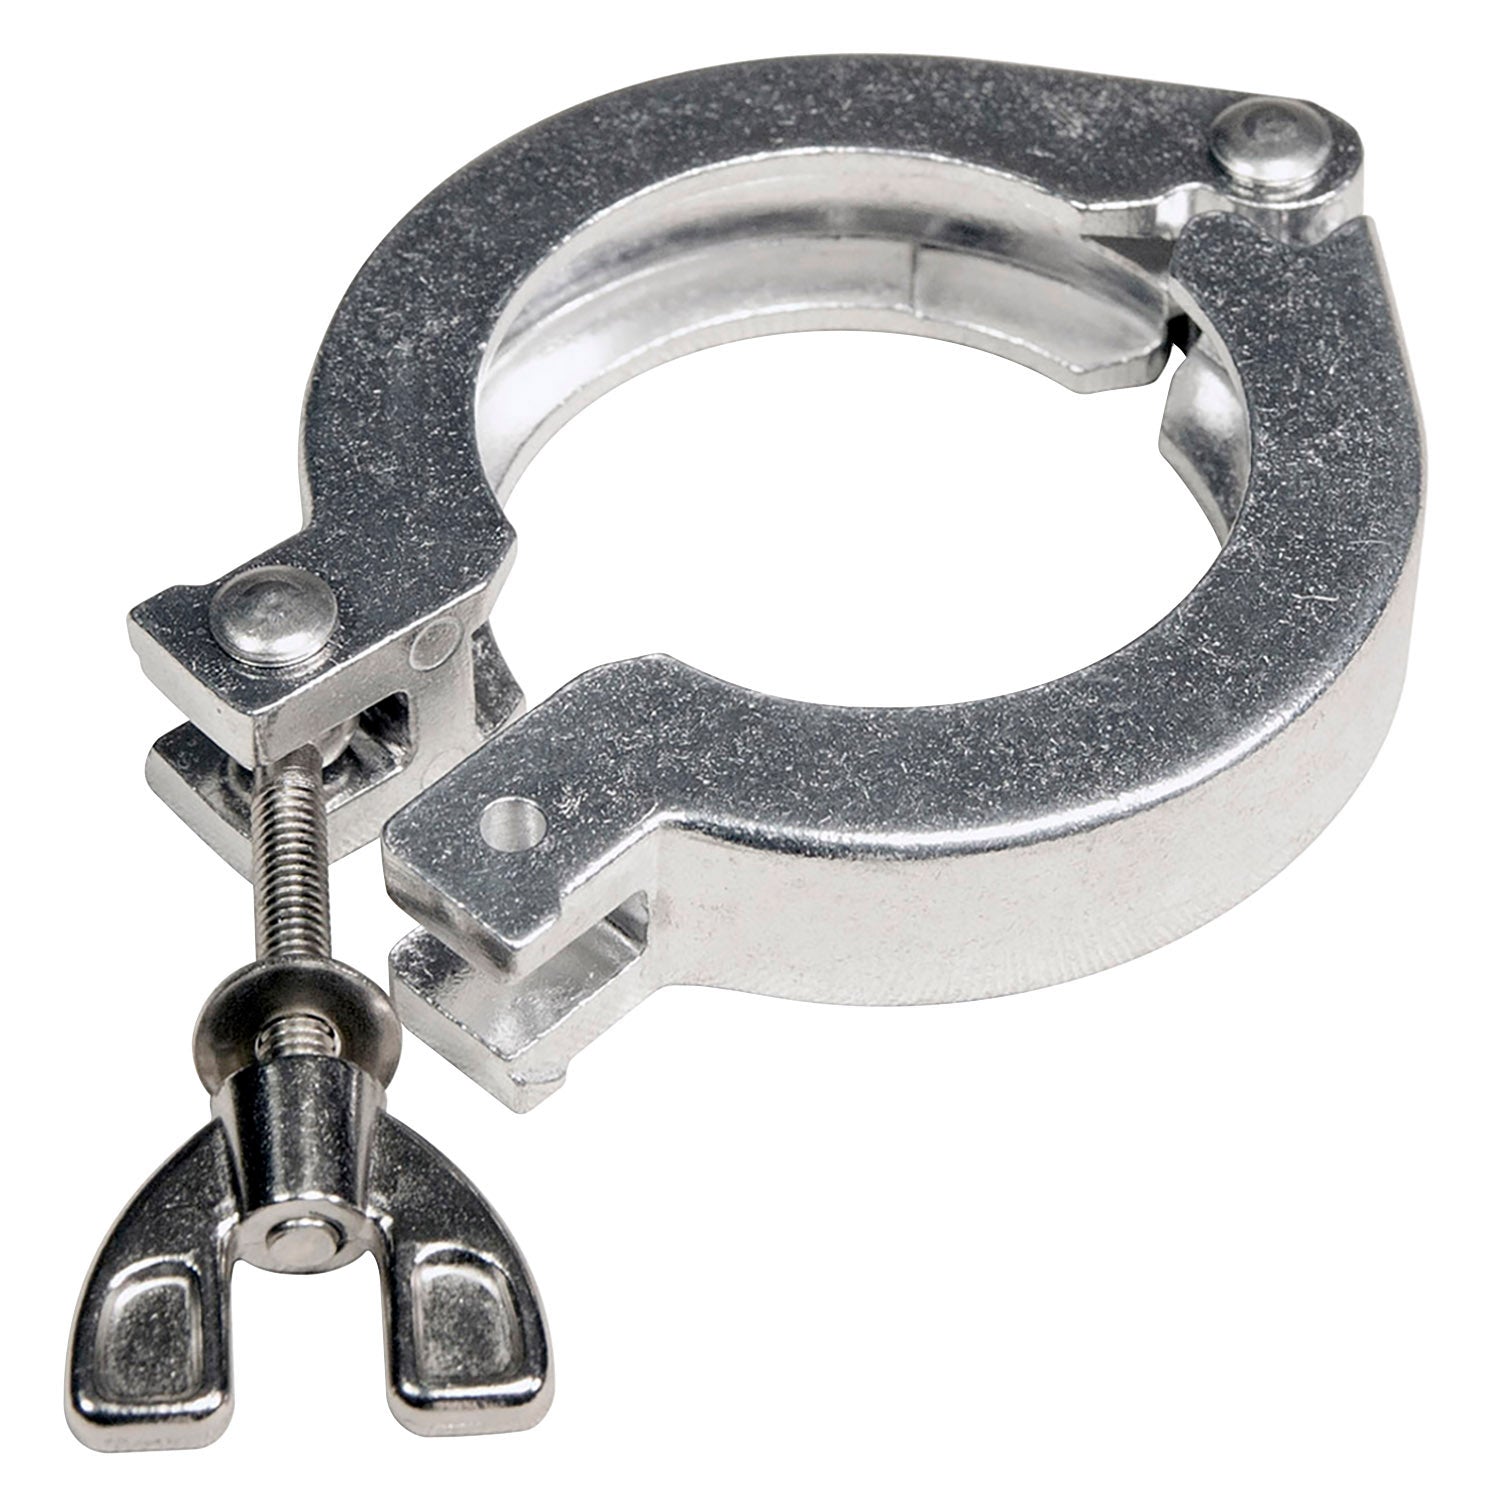 Welch 302203 HINGED CLAMP NW 40